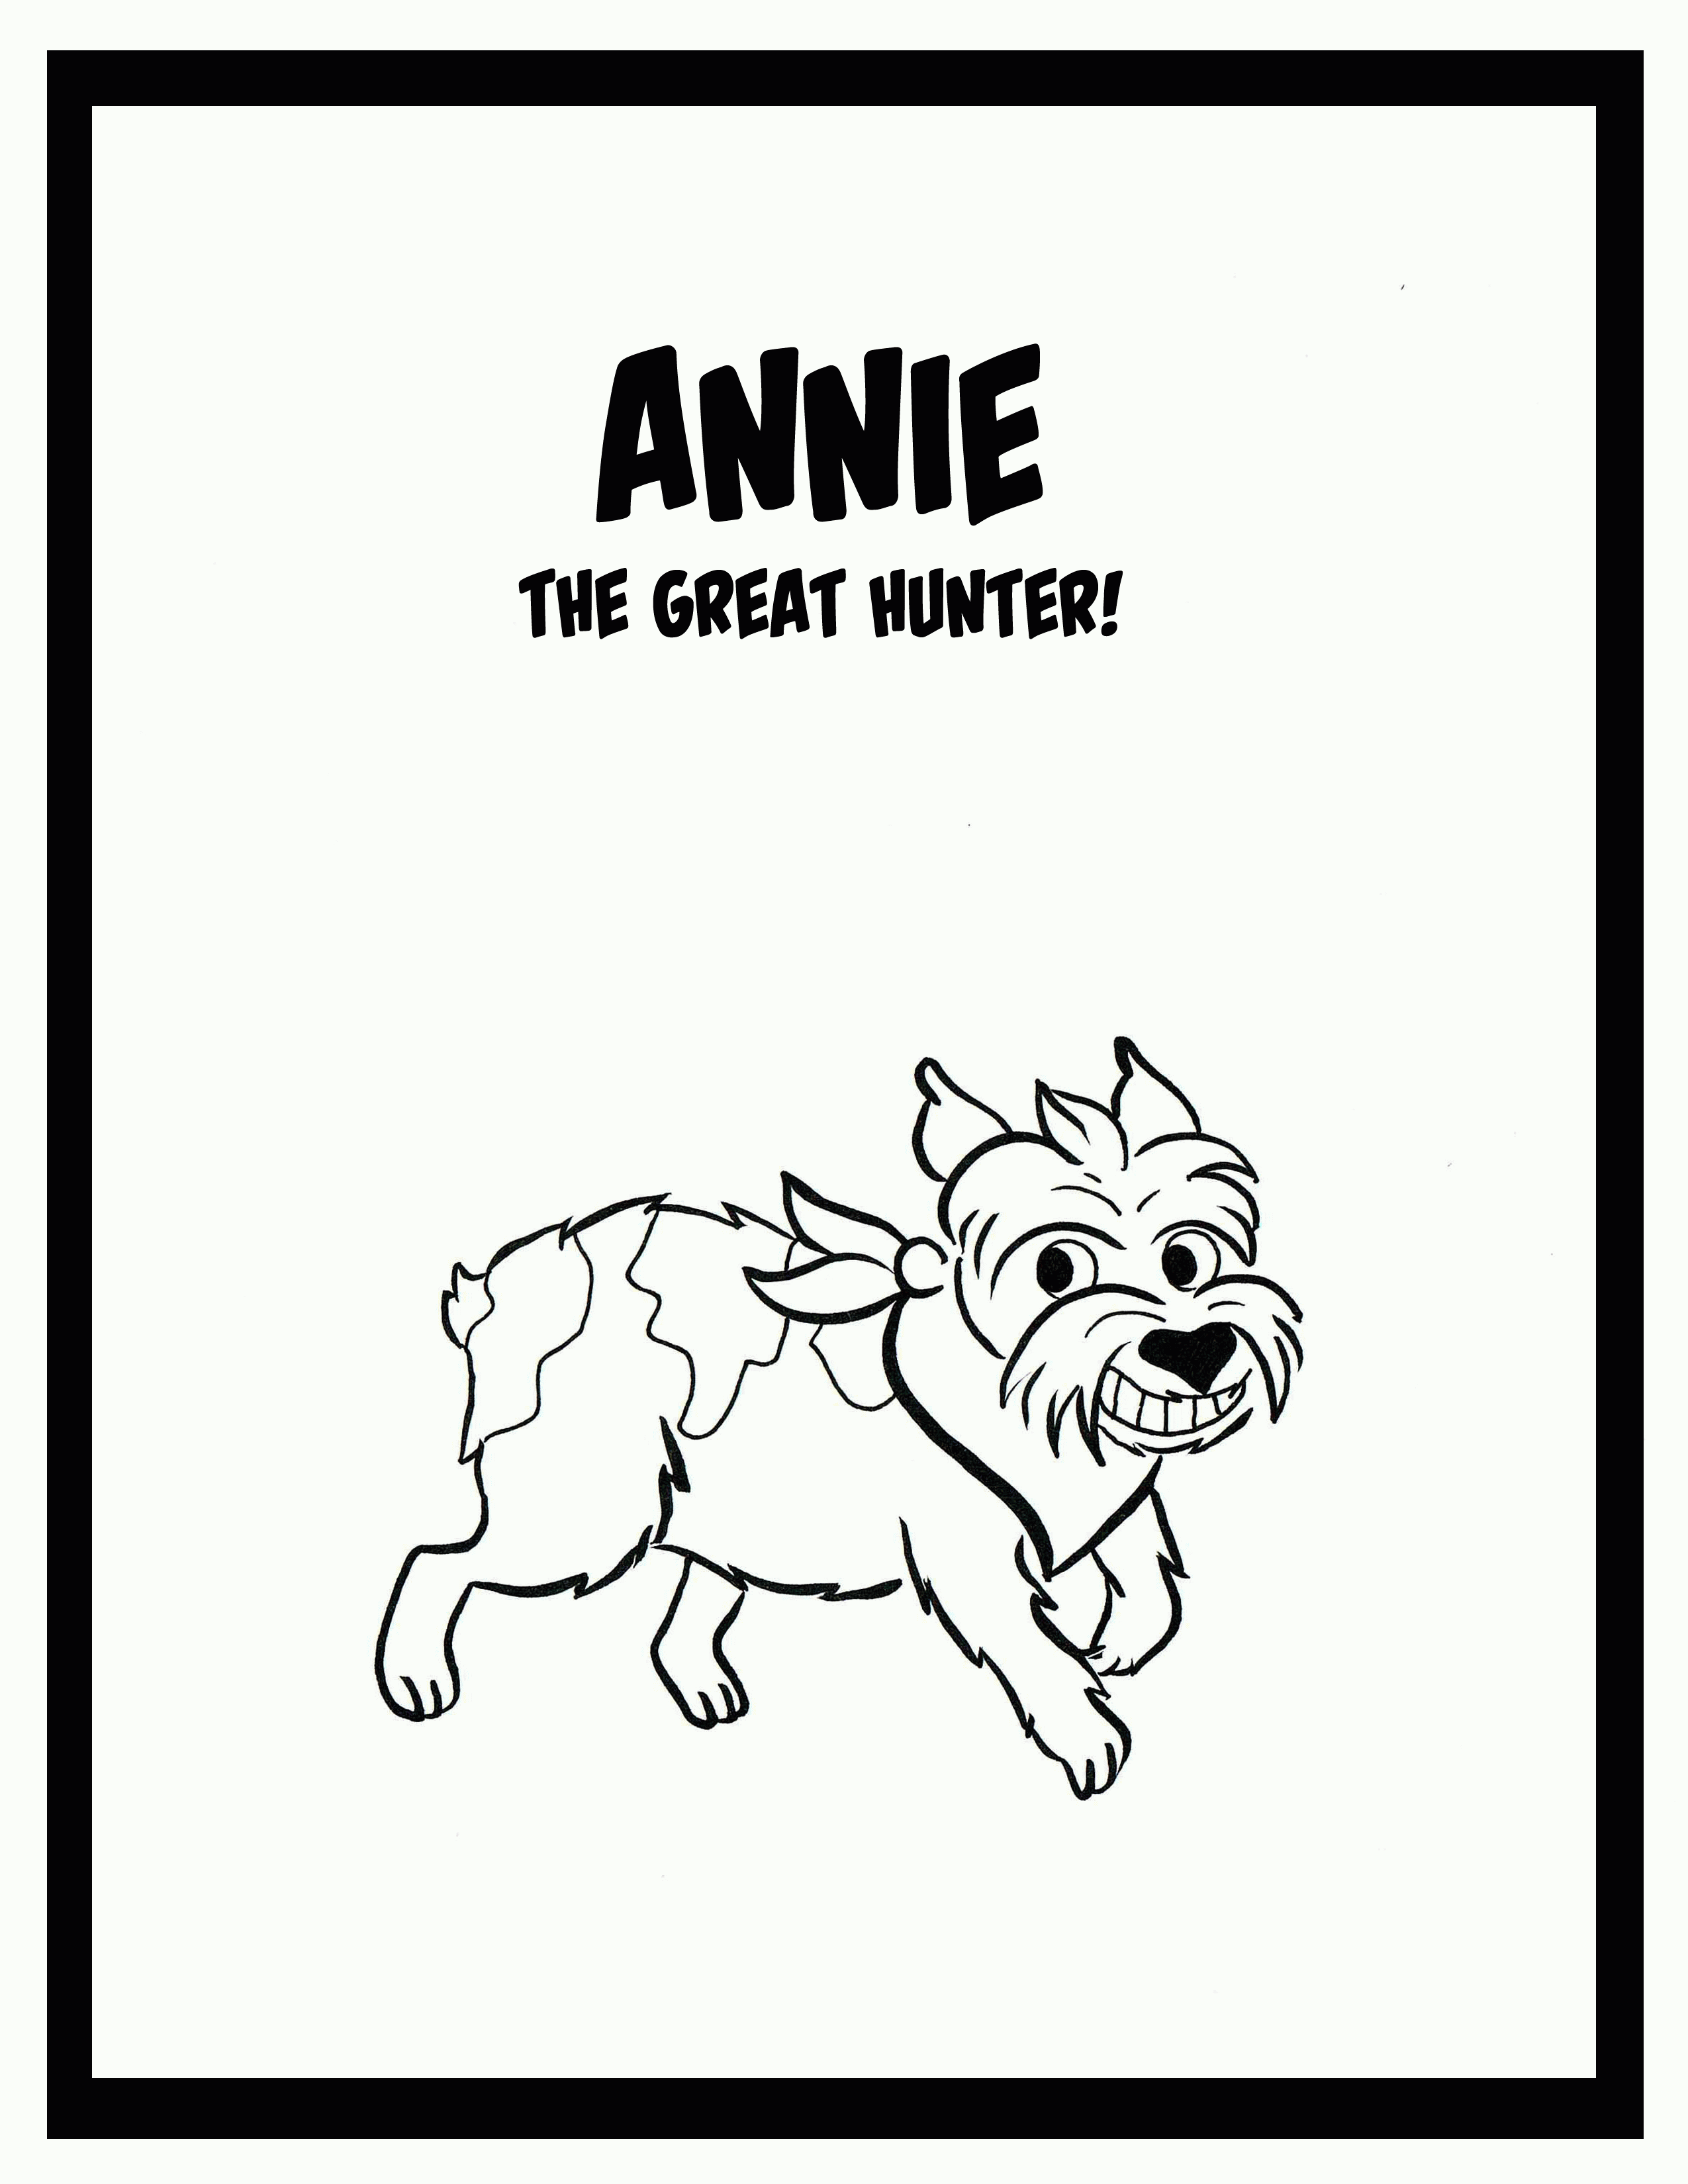 Adventures with Annie | Children's Books by Lyn Gray